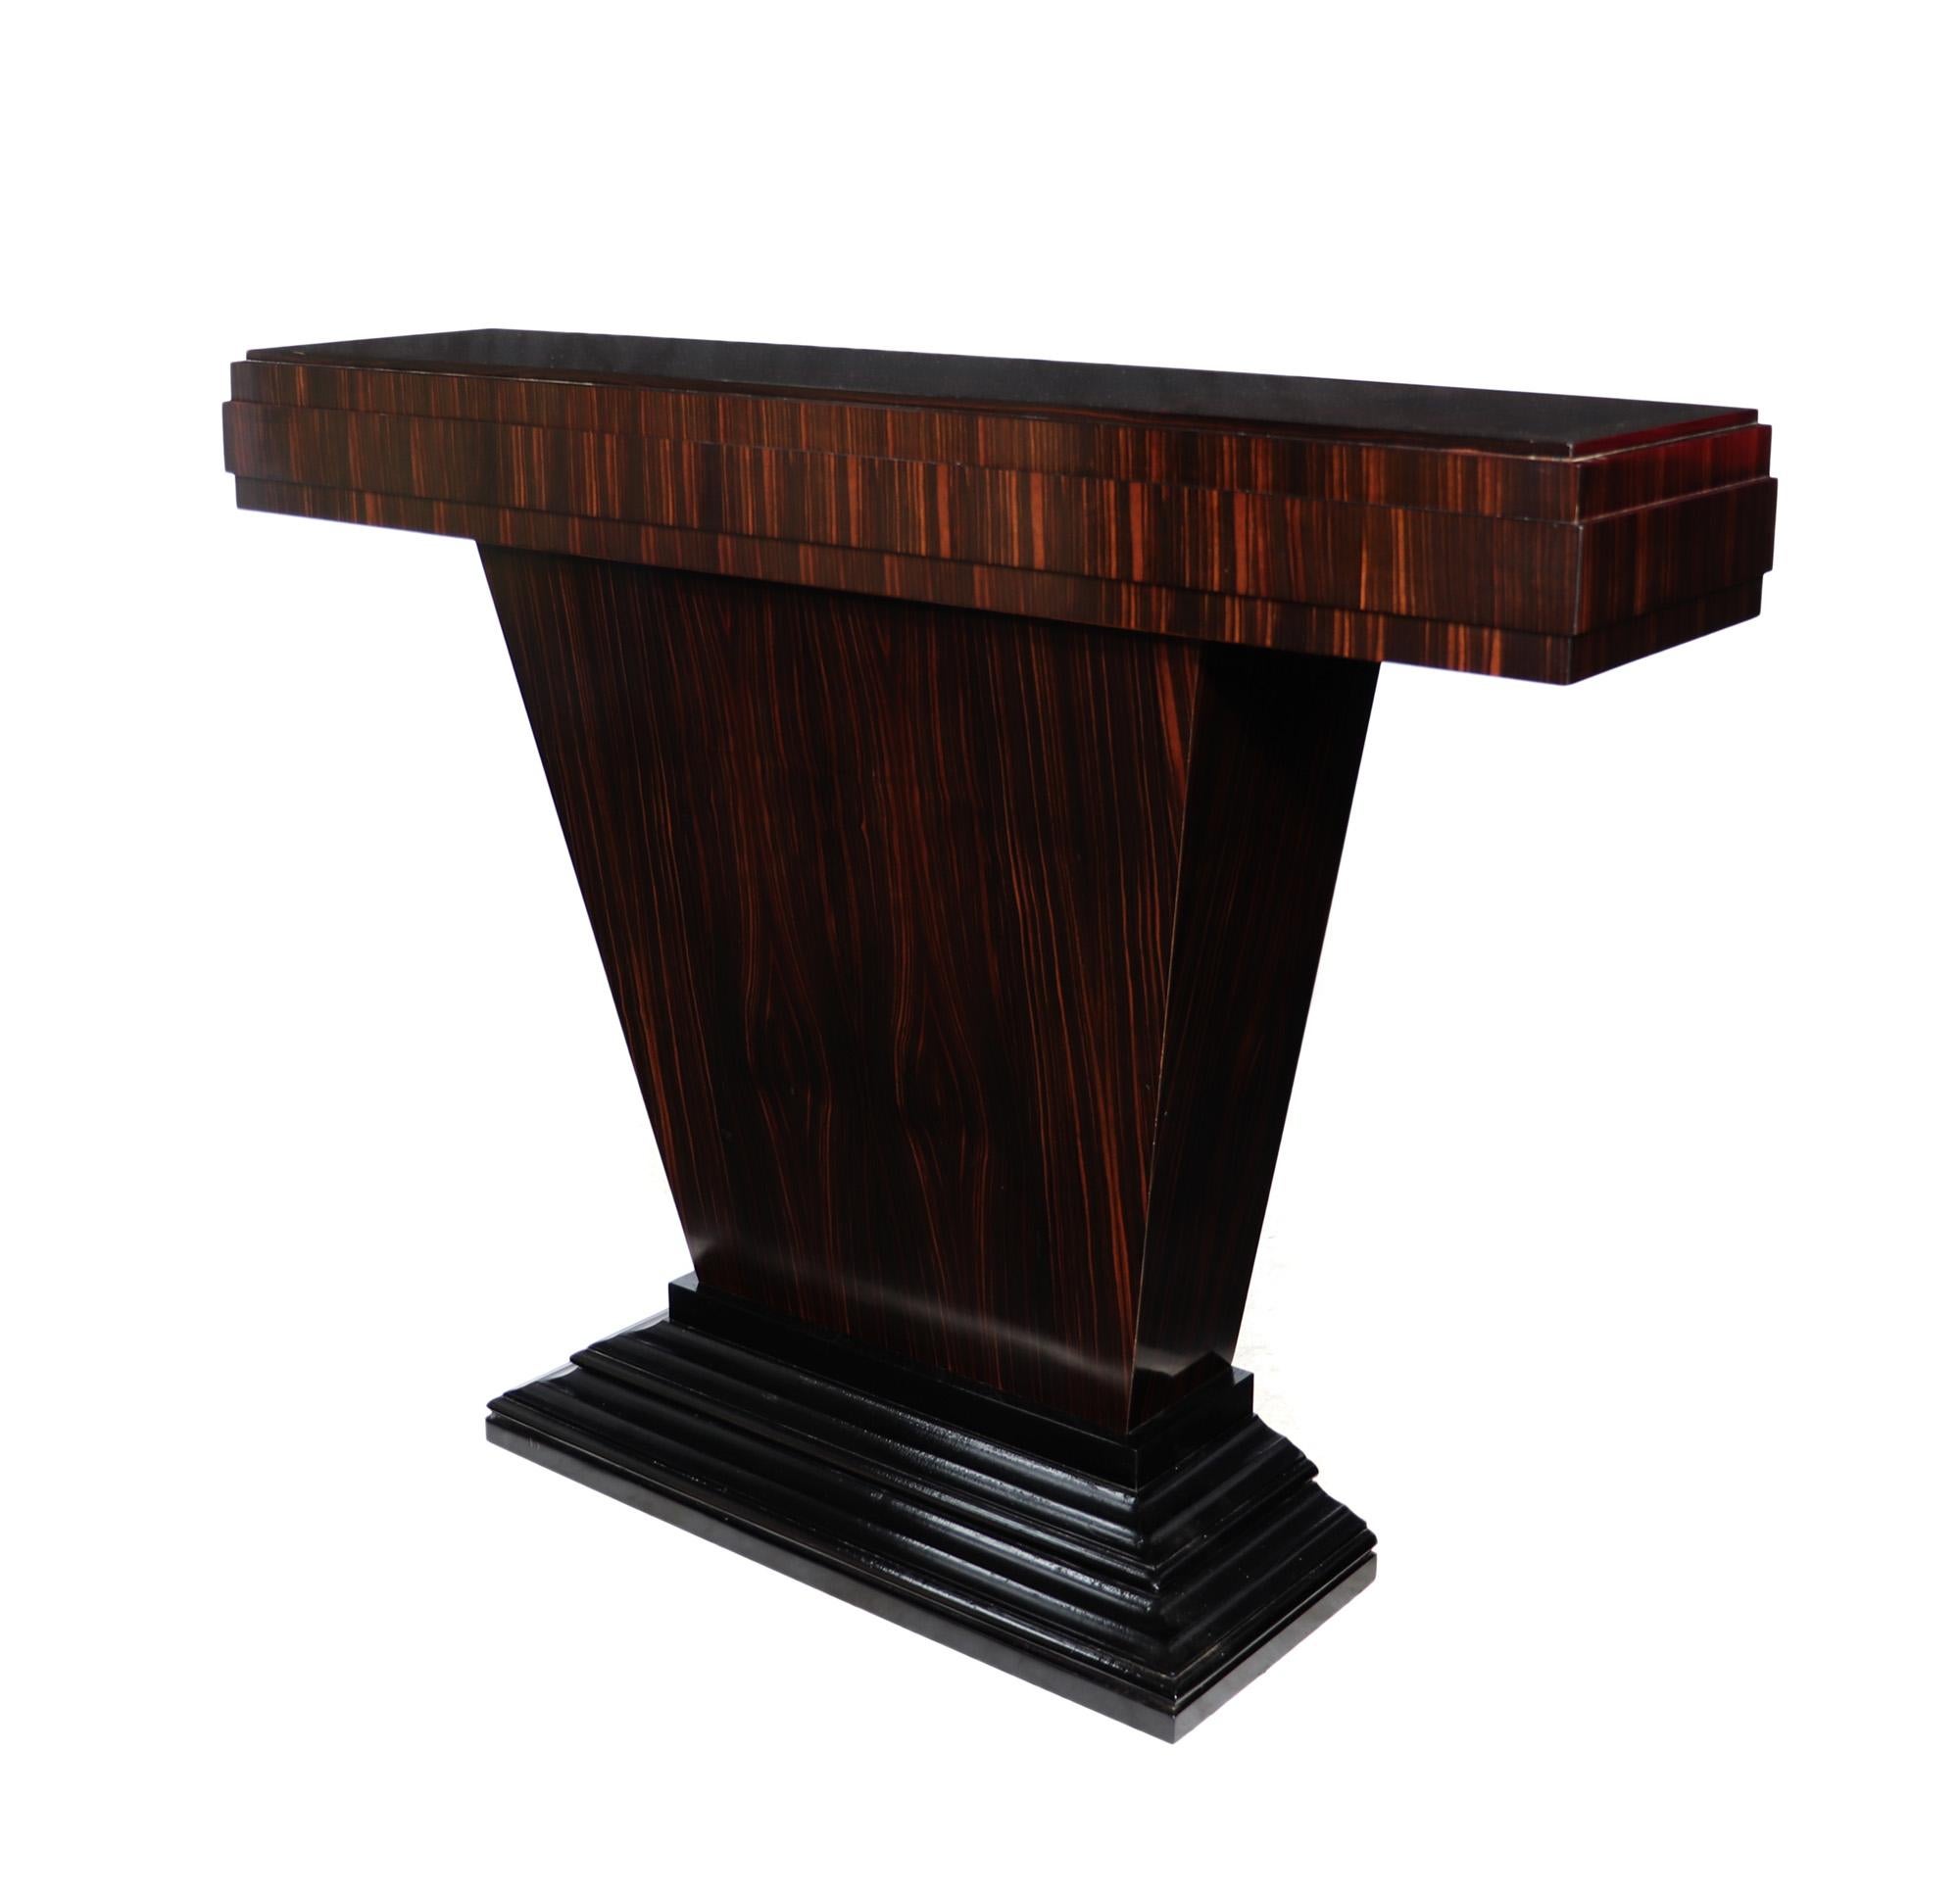 The classic French Art Deco styling of this console table combined with high quality materials and Macassar ebony veneers would fit into any interior, Designed by Thomas London and produced in England by skilled cabinetmakers using traditional